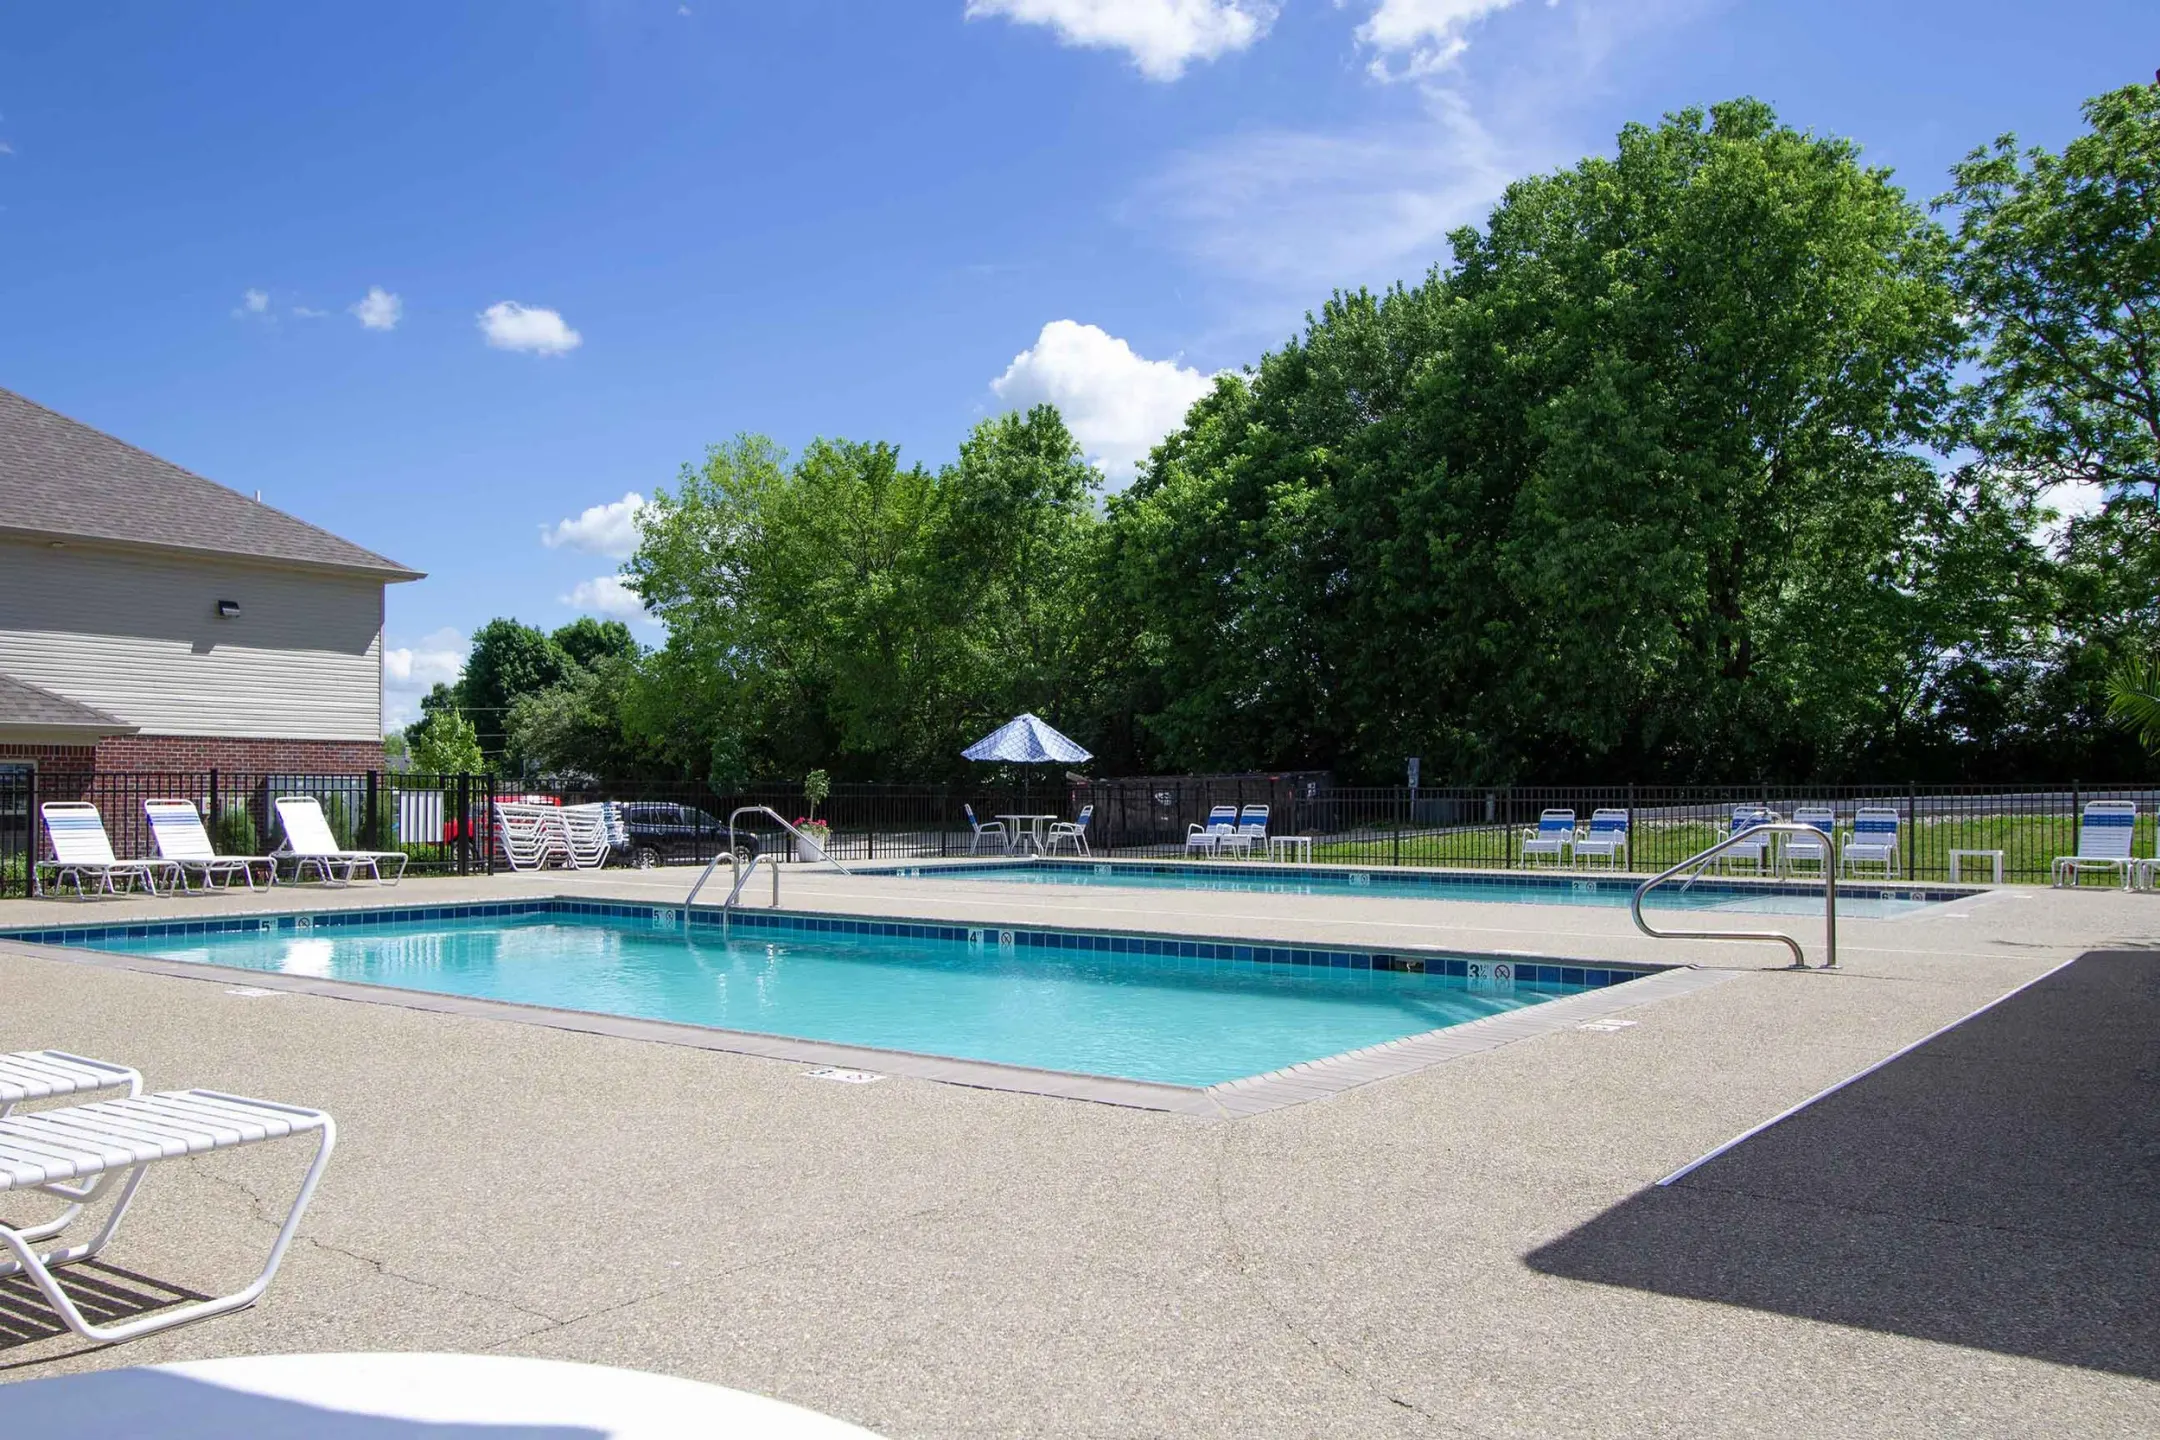 Pool - Parkside Heights - Luxury Apartments - Lexington, KY